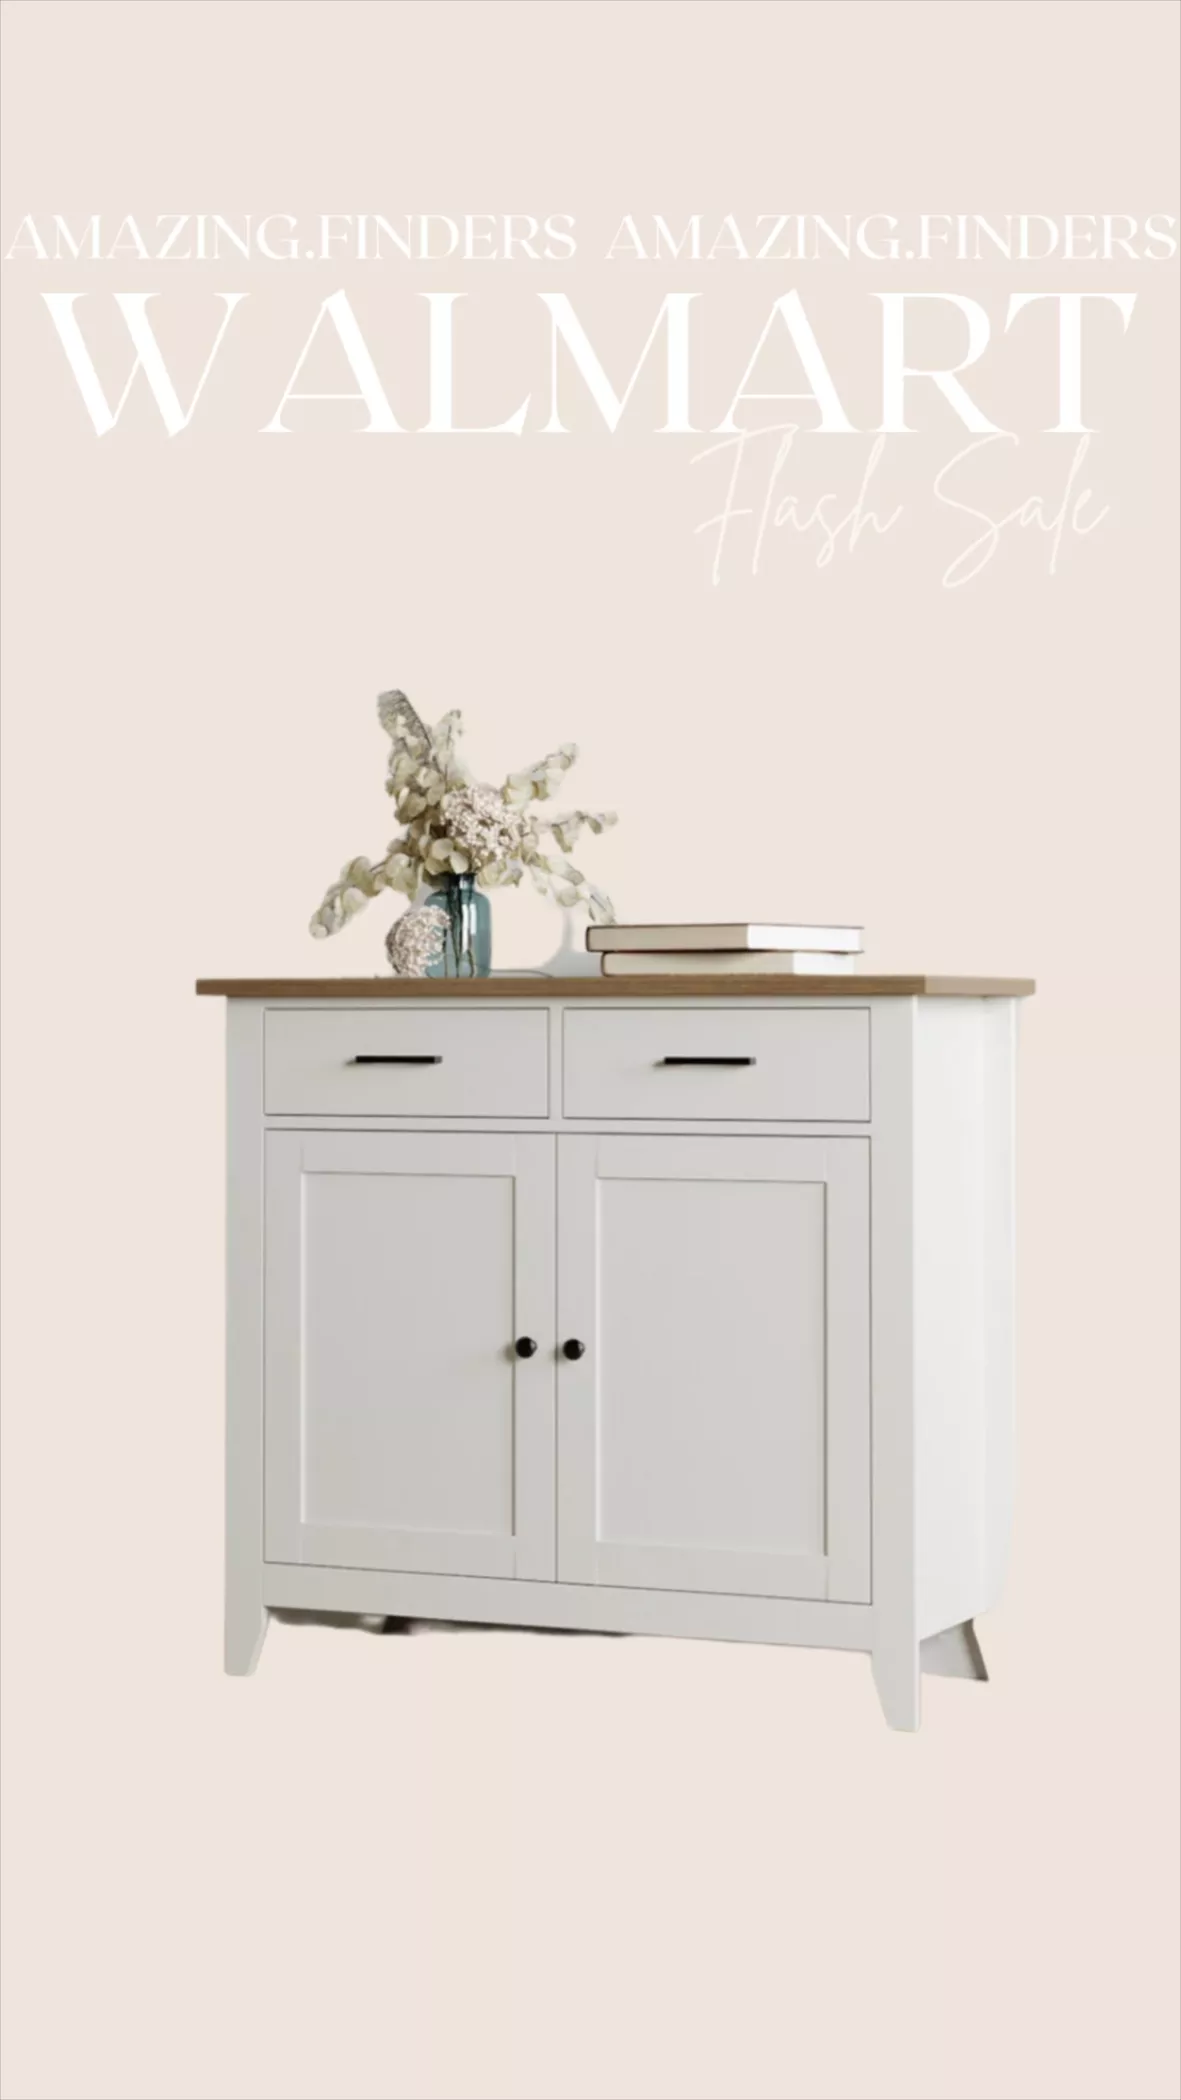 Homfa Entryway Storage Cabinet, Sideboard with 2 Drawers for Kitchen Living  Room, White 